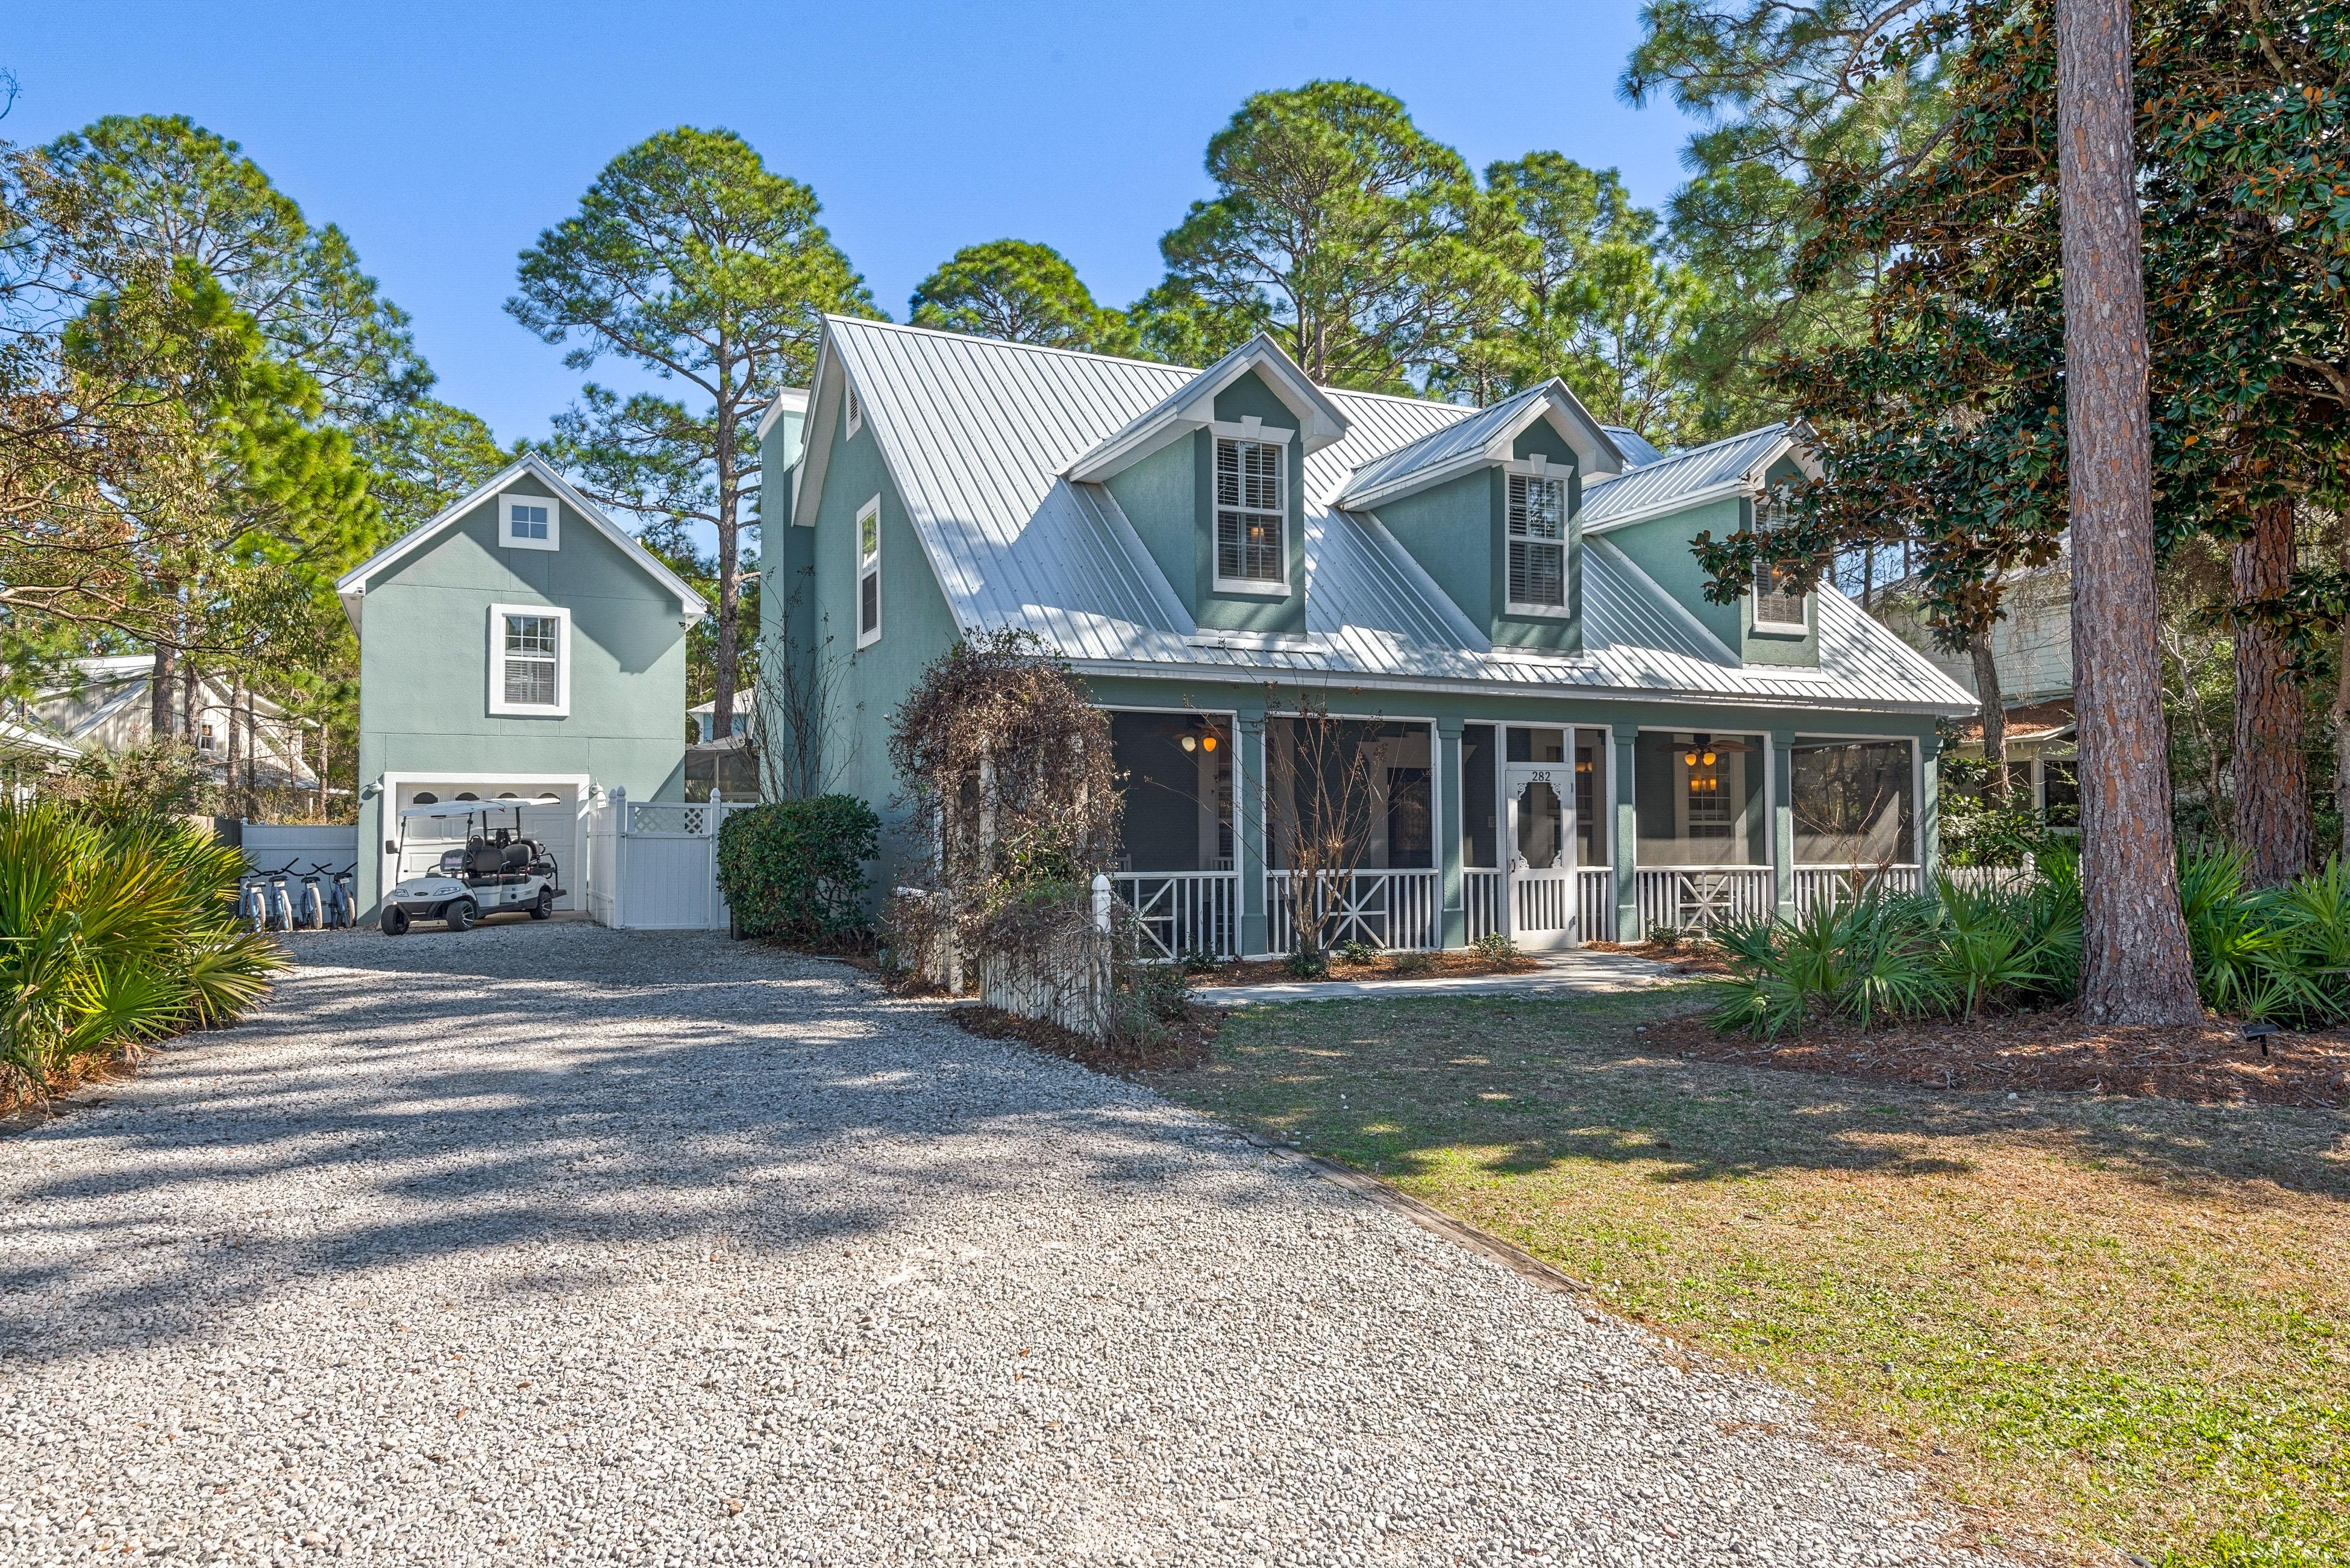 Property Image 1 - Seagrove Beach: Barefoot Bliss